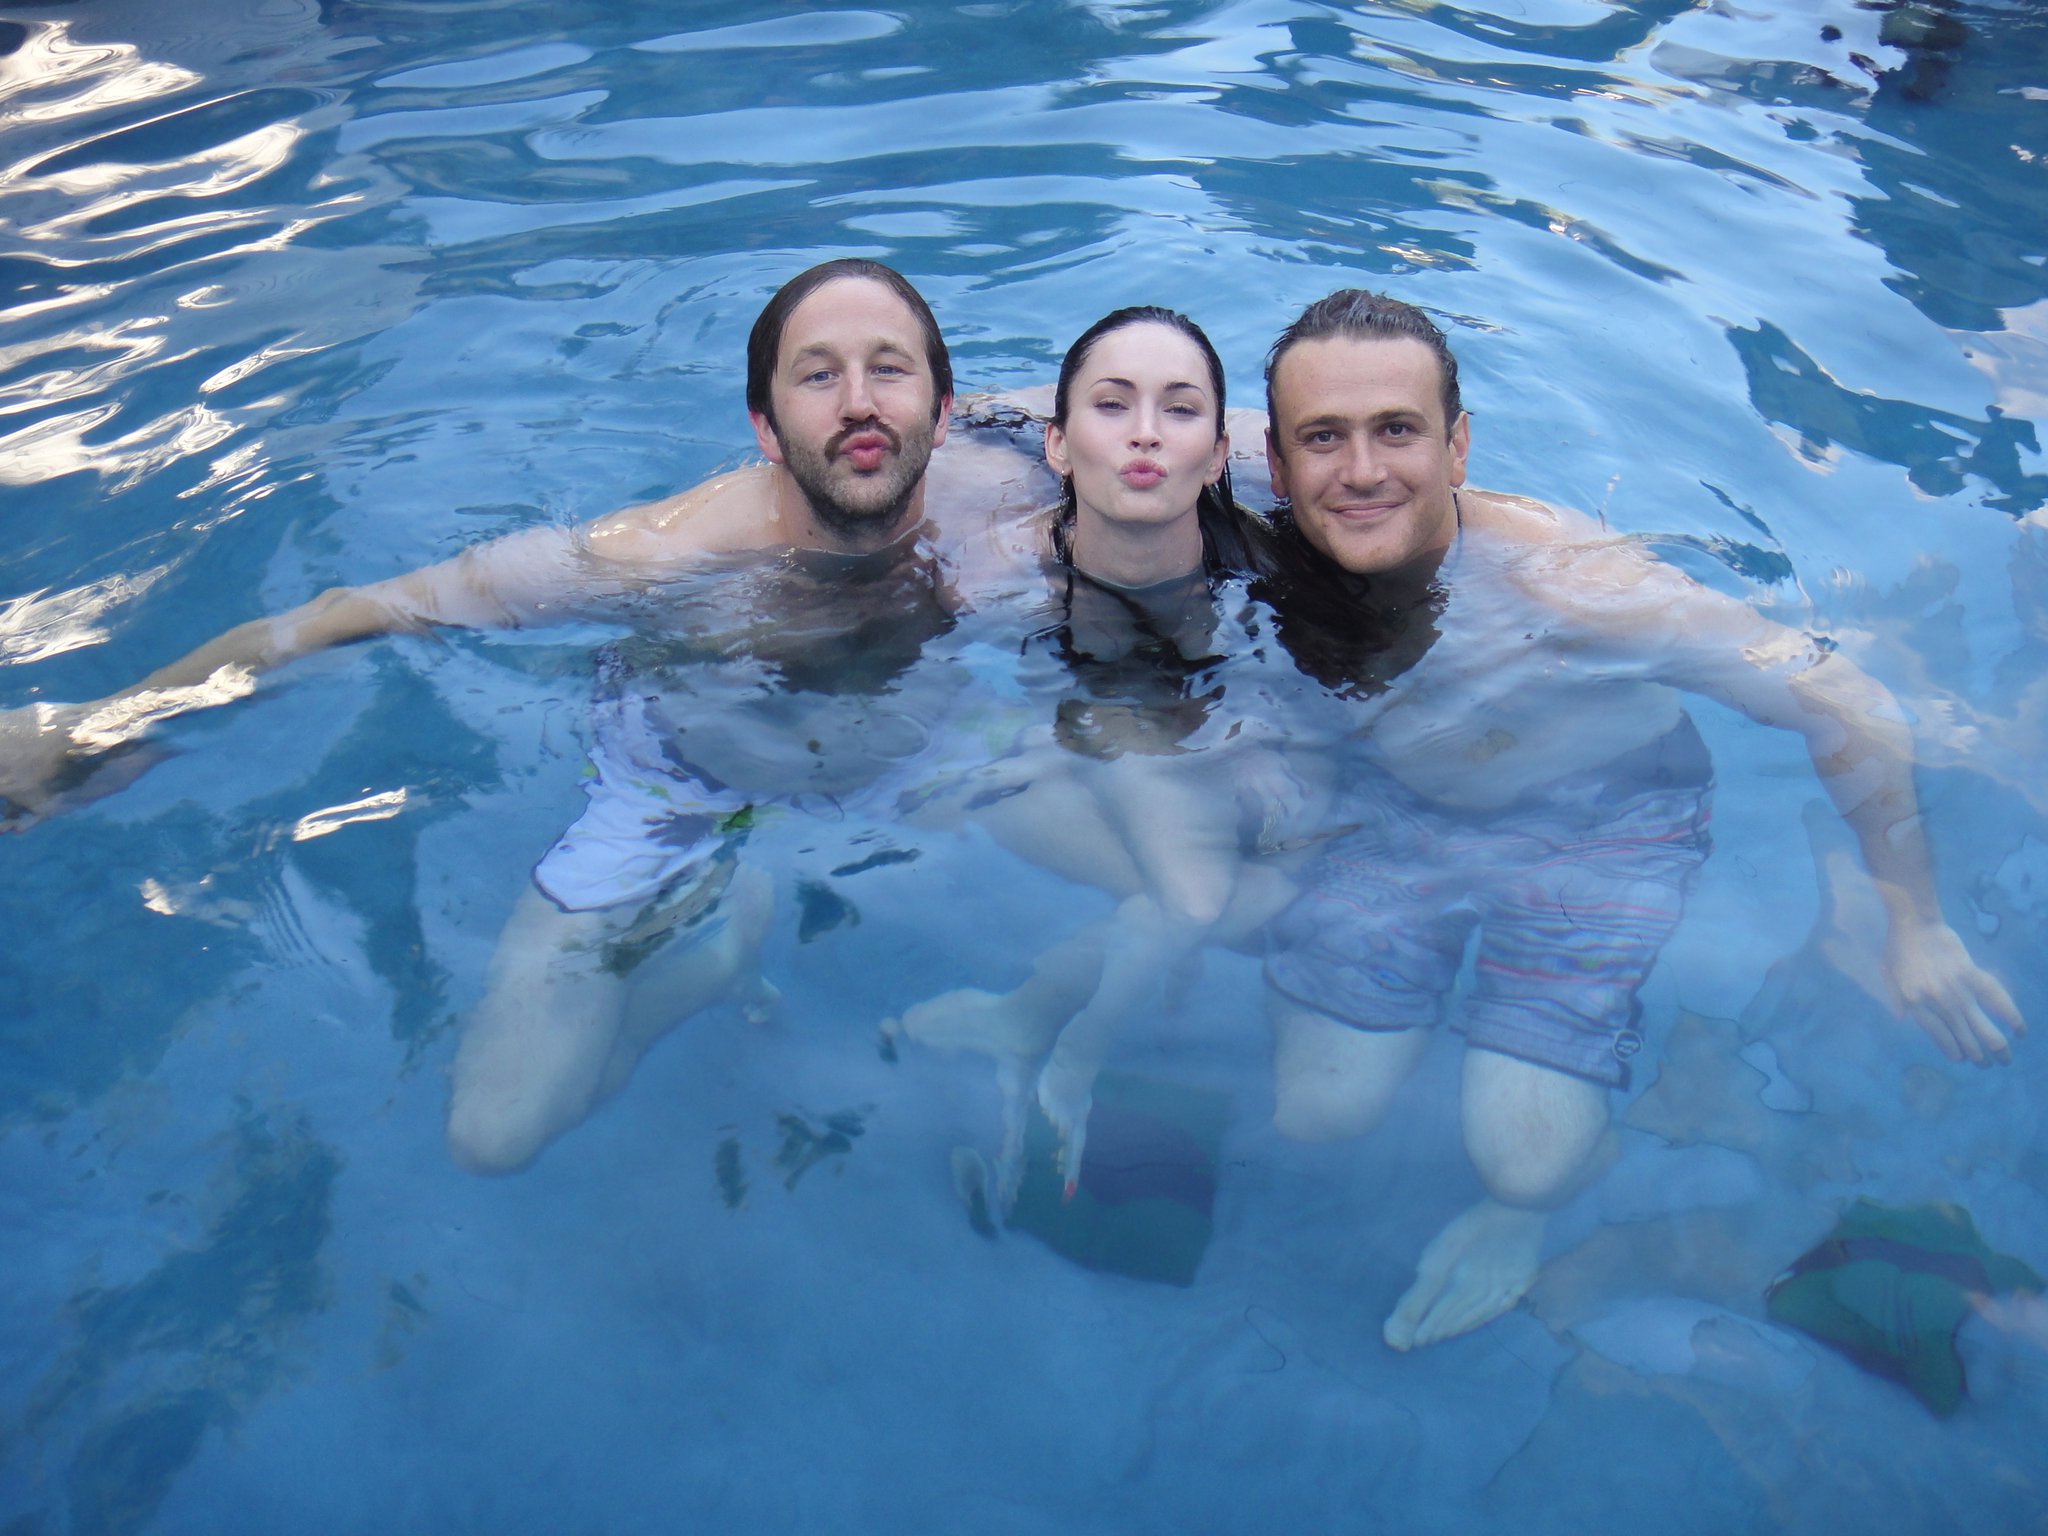 Megan Fox Swims with ‘Two Very Handsome Men’ .